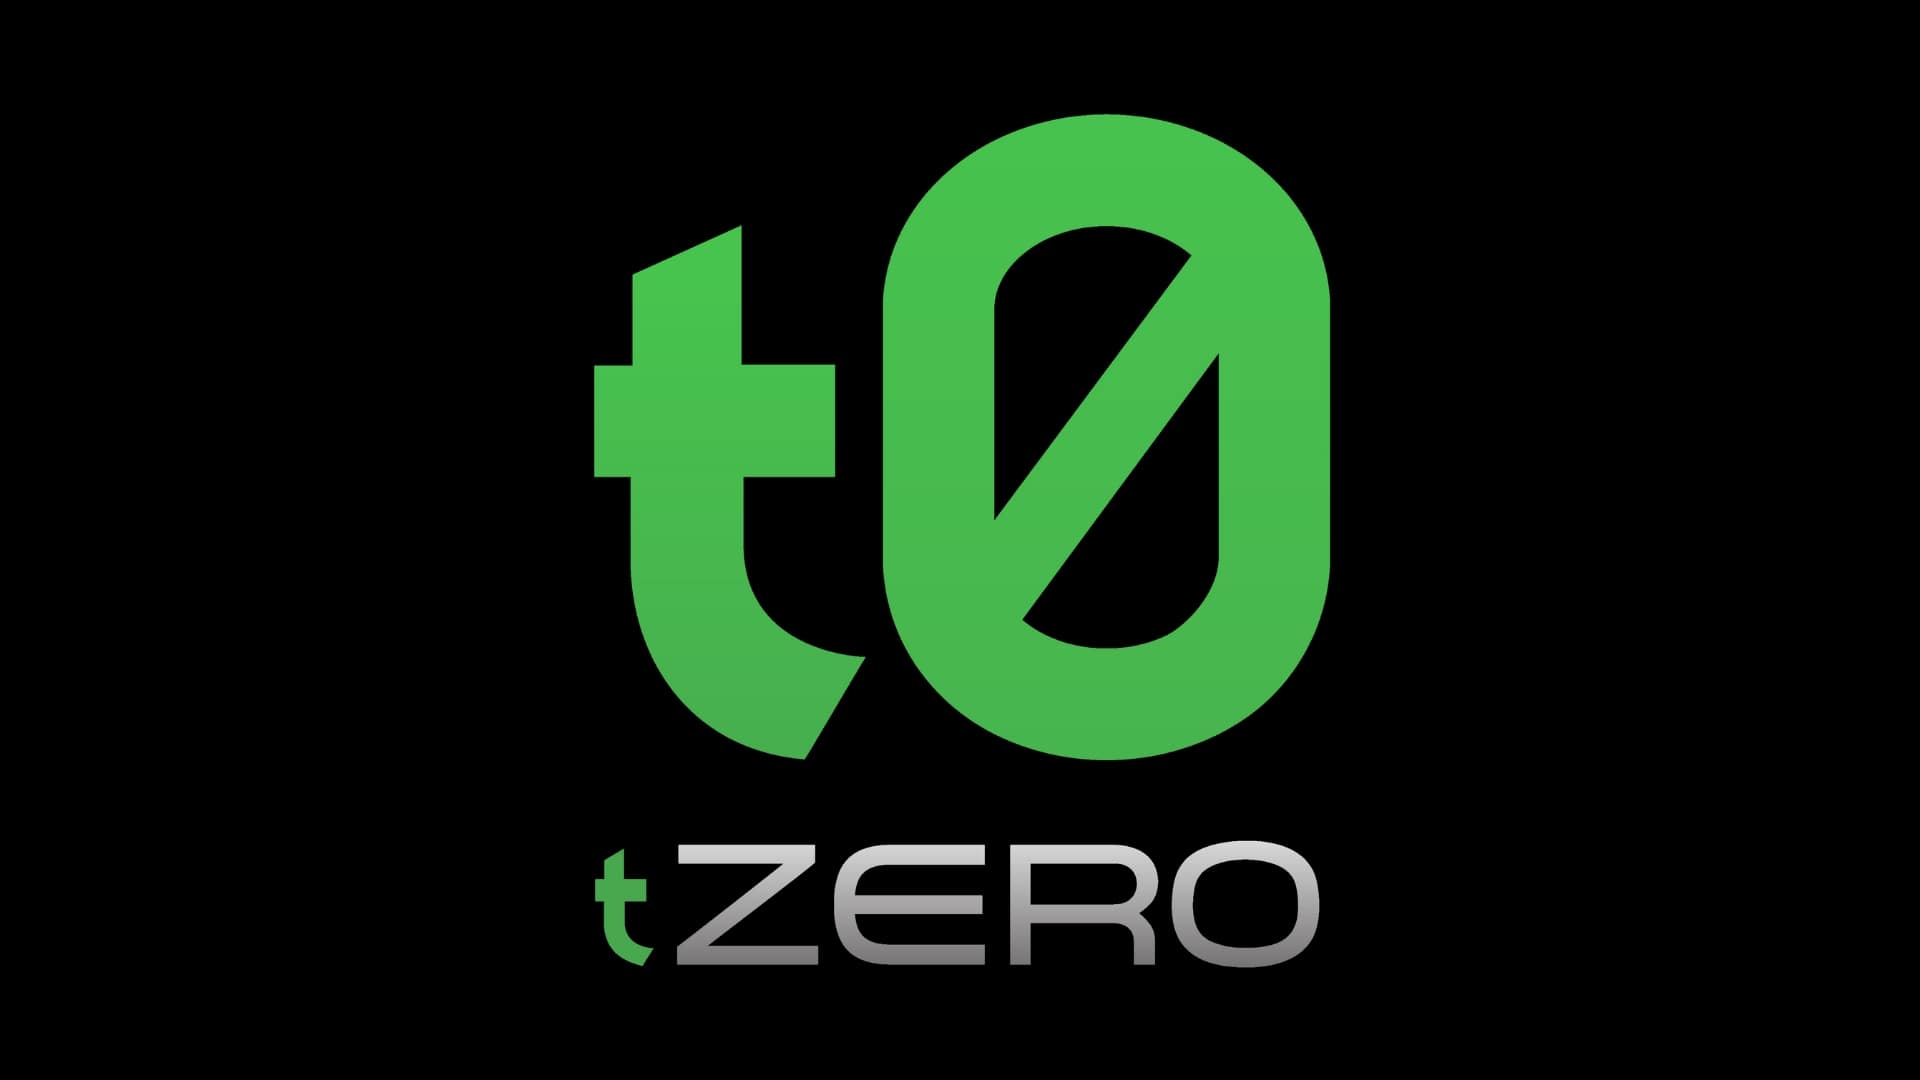 TZero Announces The Launch Of Its New Regulated STO Platform